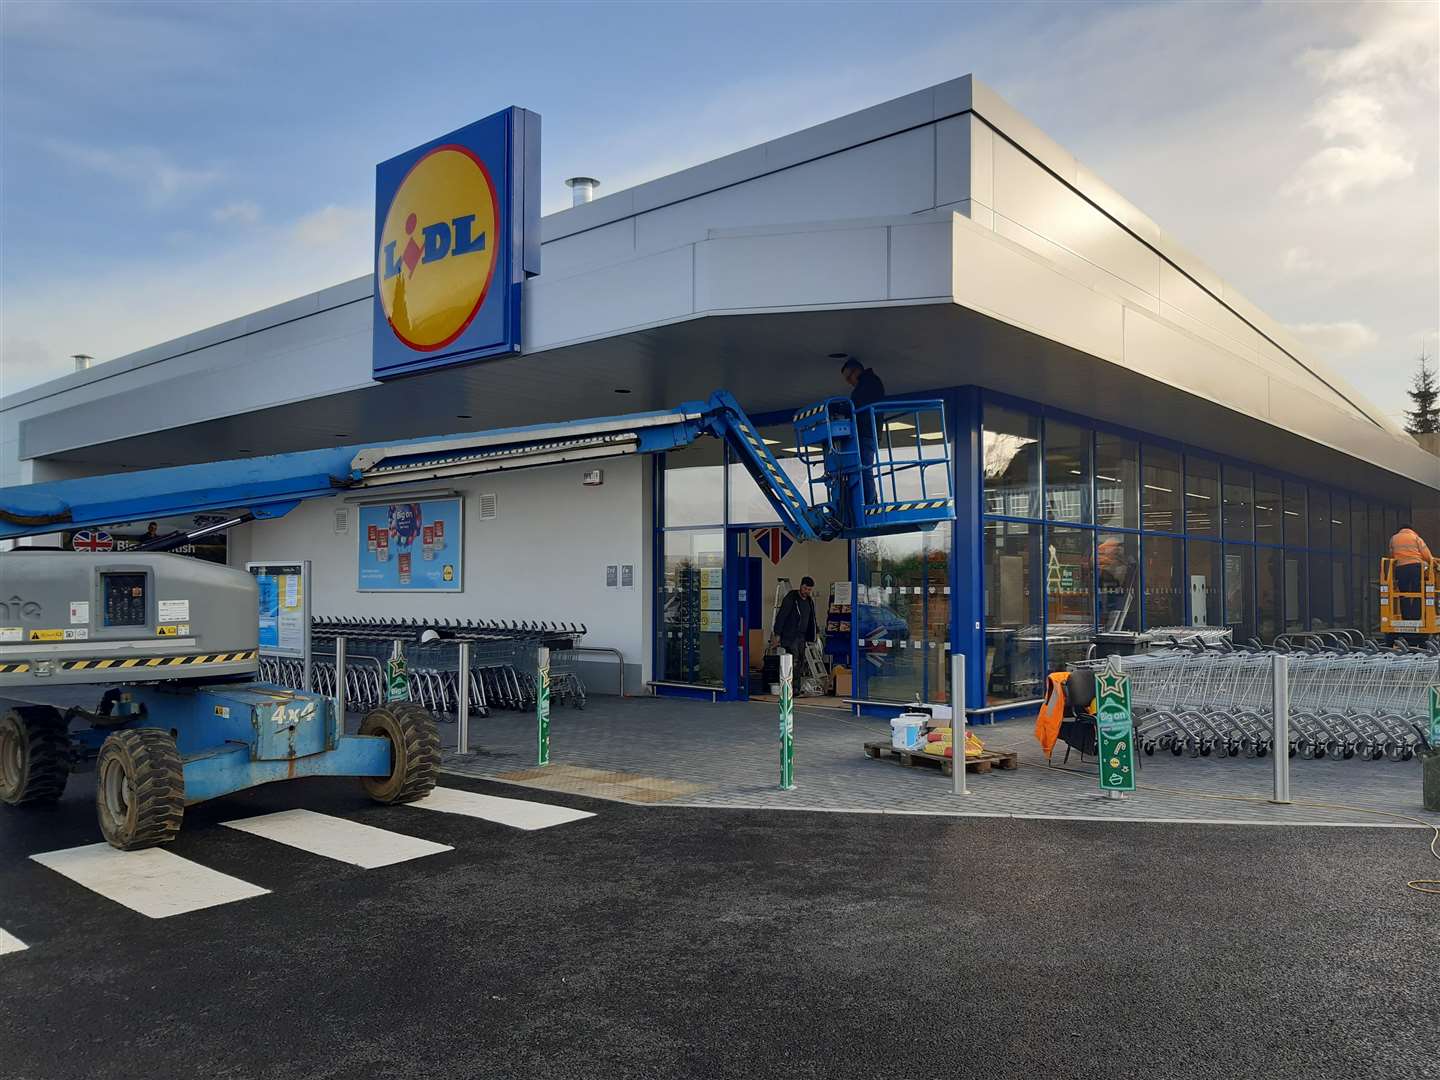 The finishing touches being put to the recently opened Lidl store in London Road, Ditton